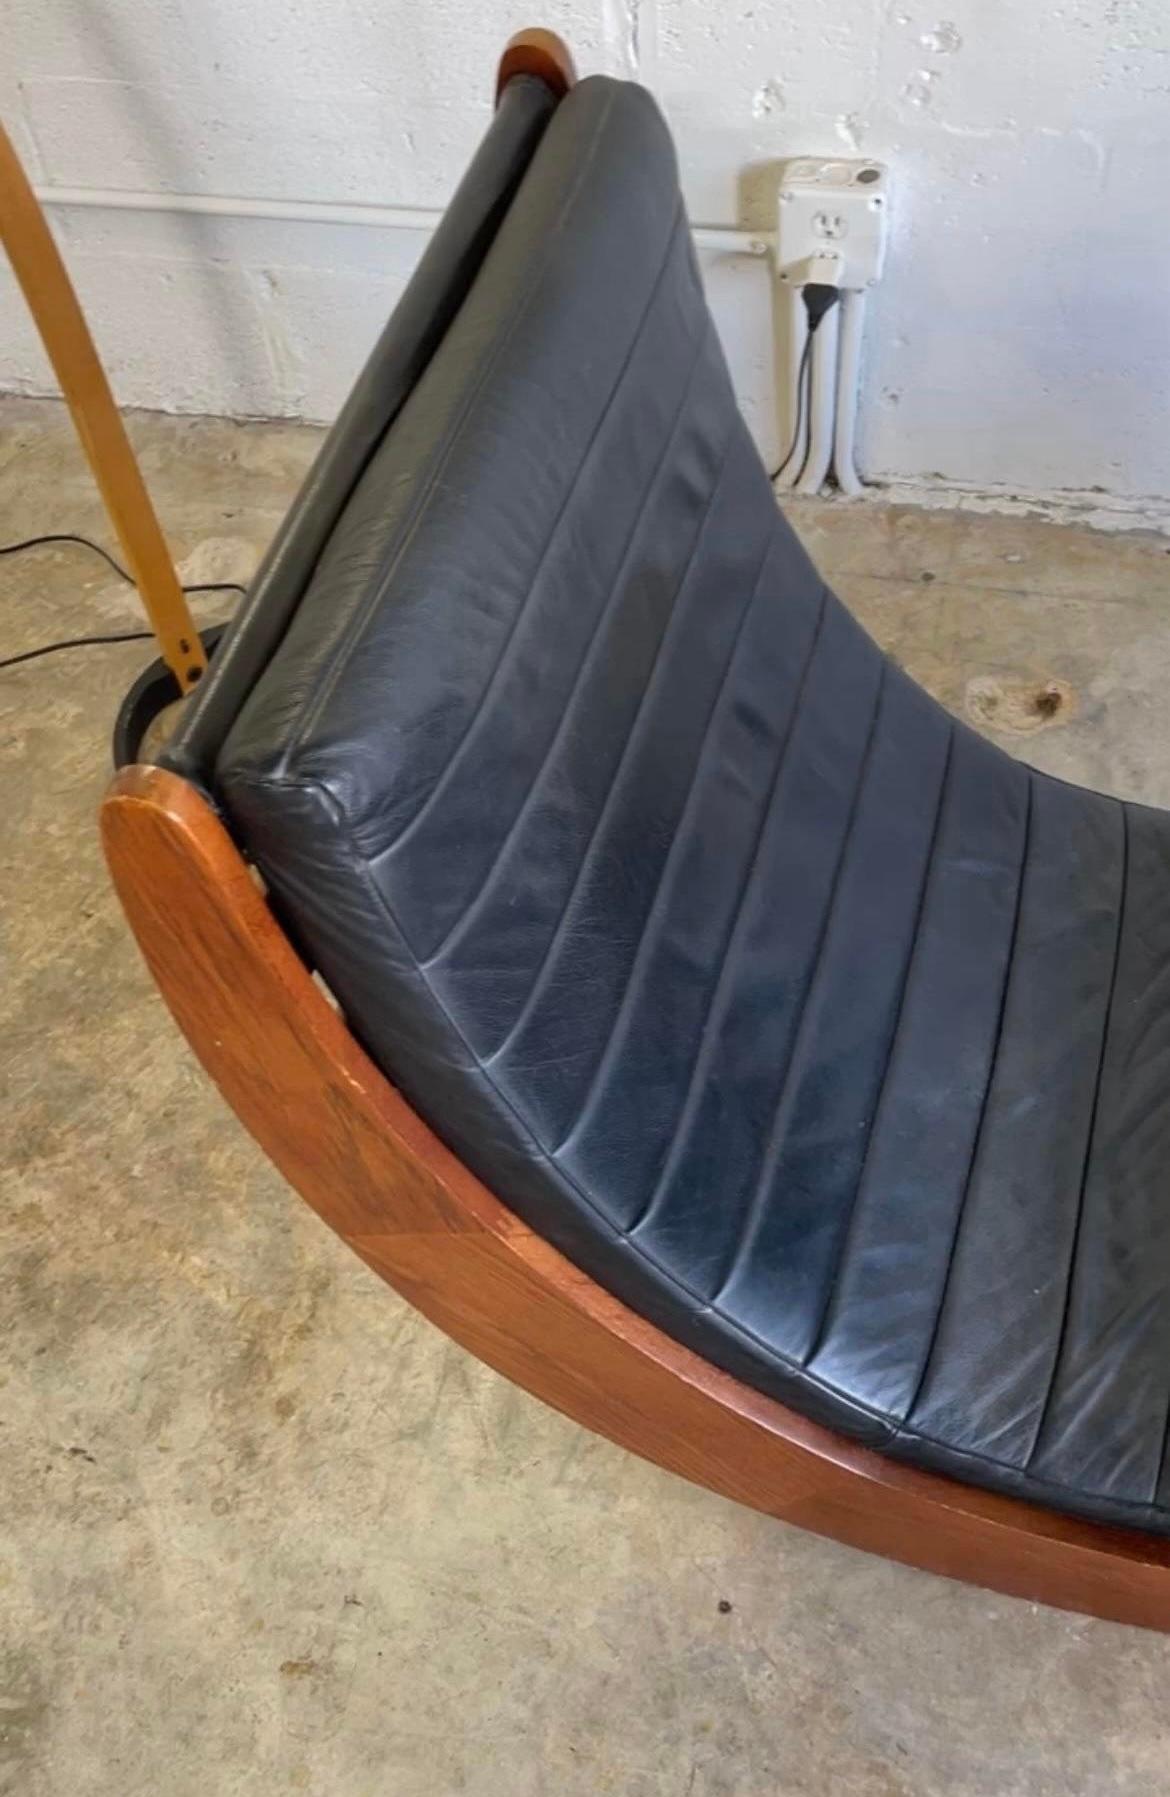 Verner Panton “Relaxer” Mid Century Rocking Chair In Good Condition For Sale In Fort Lauderdale, FL